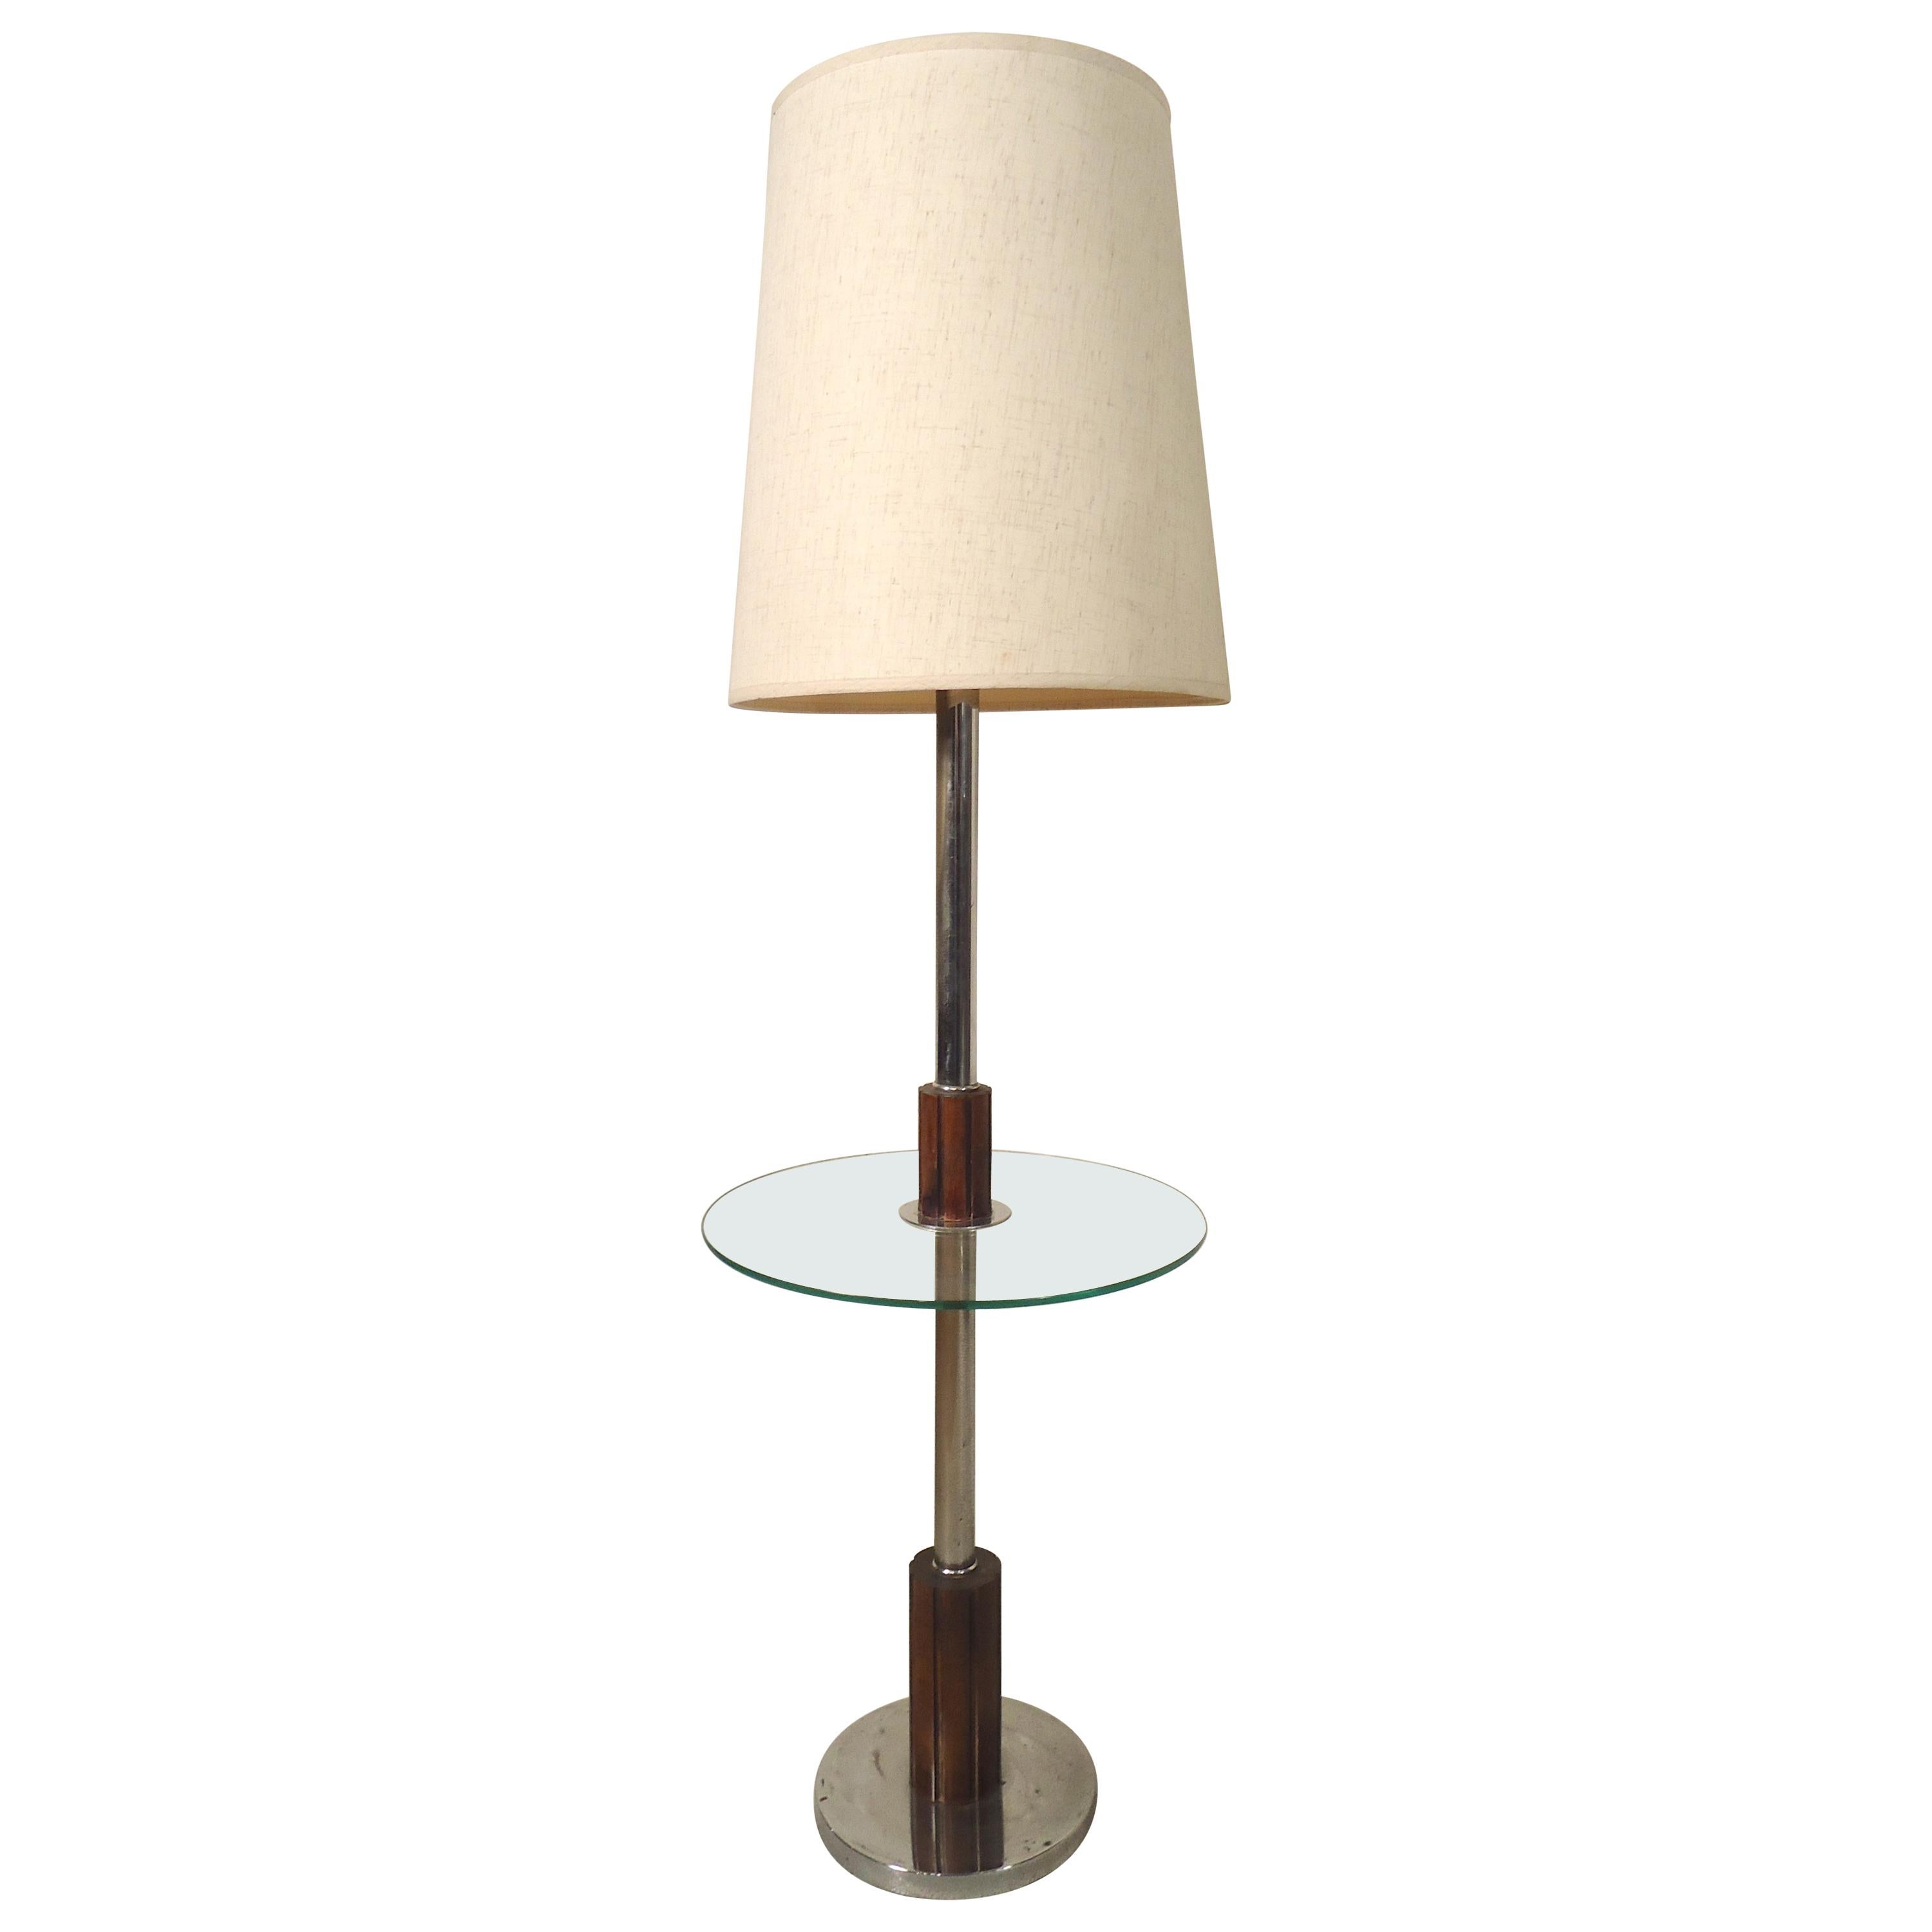 Midcentury Floor Lamp with Table